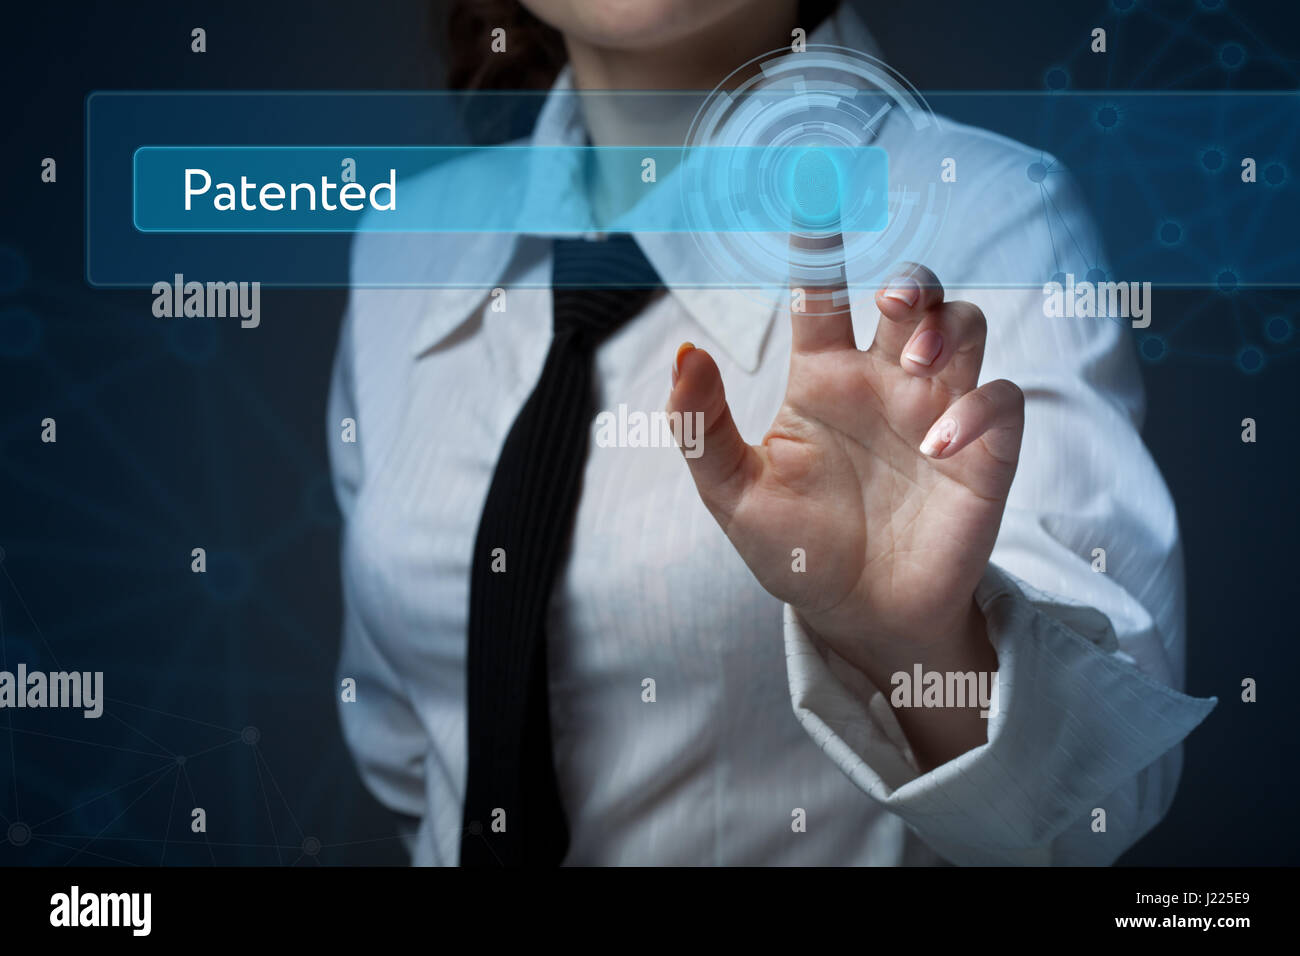 Business, technology, internet and networking concept. Business woman presses a button on the virtual screen: Patented Stock Photo